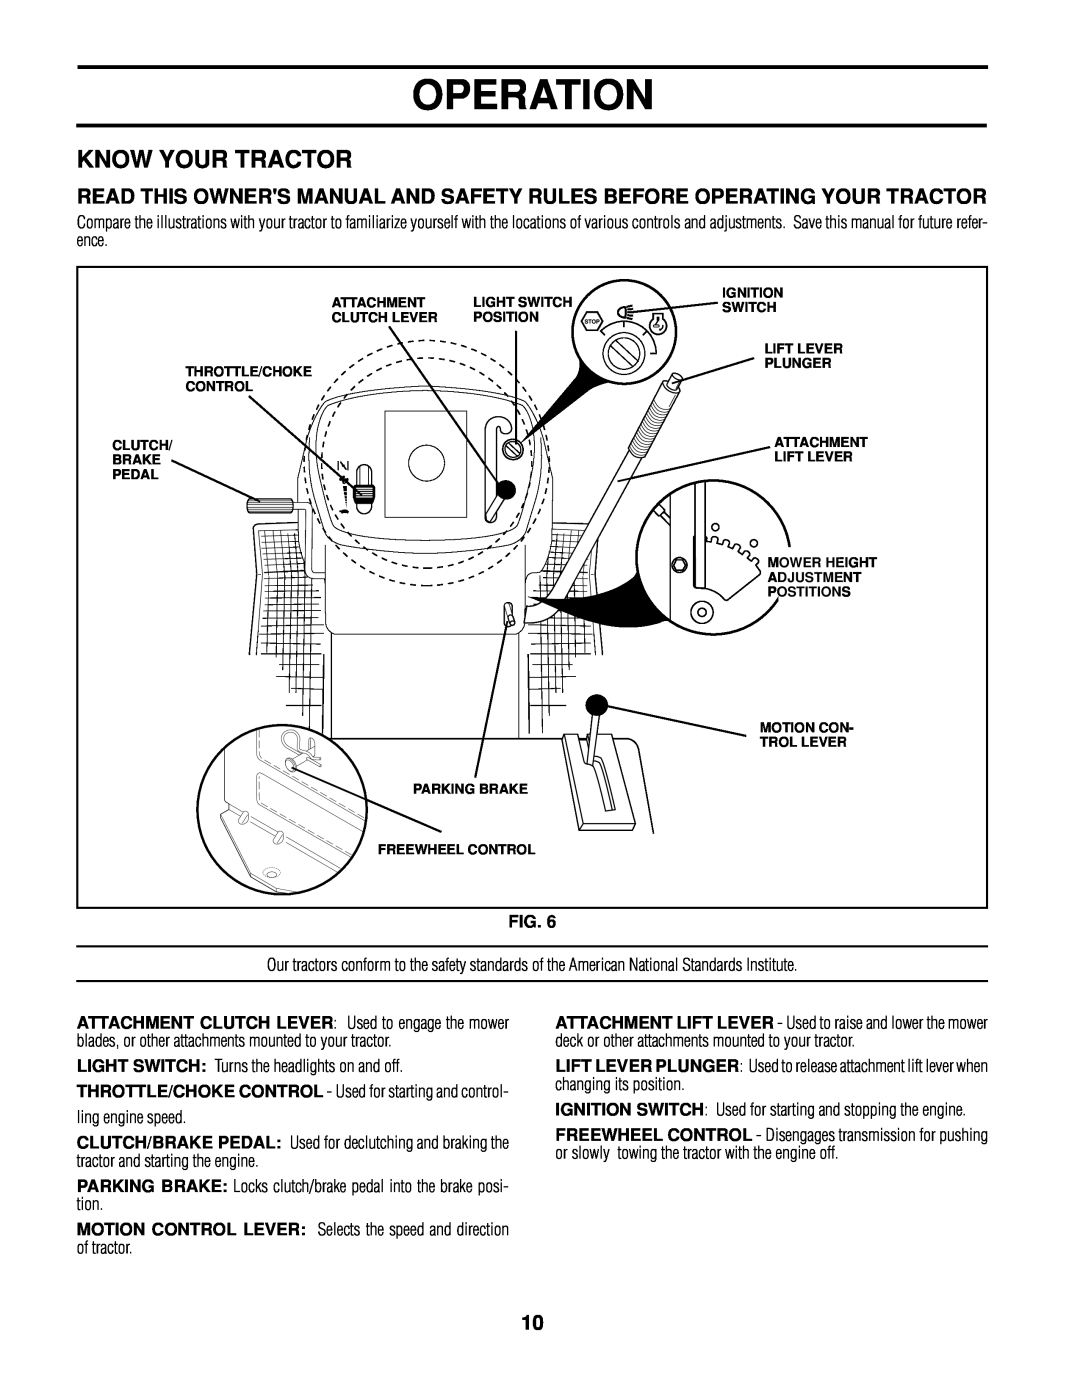 Poulan 161608 owner manual Know Your Tractor, Operation, MOTION CONTROL LEVER Selects the speed and direction of tractor 